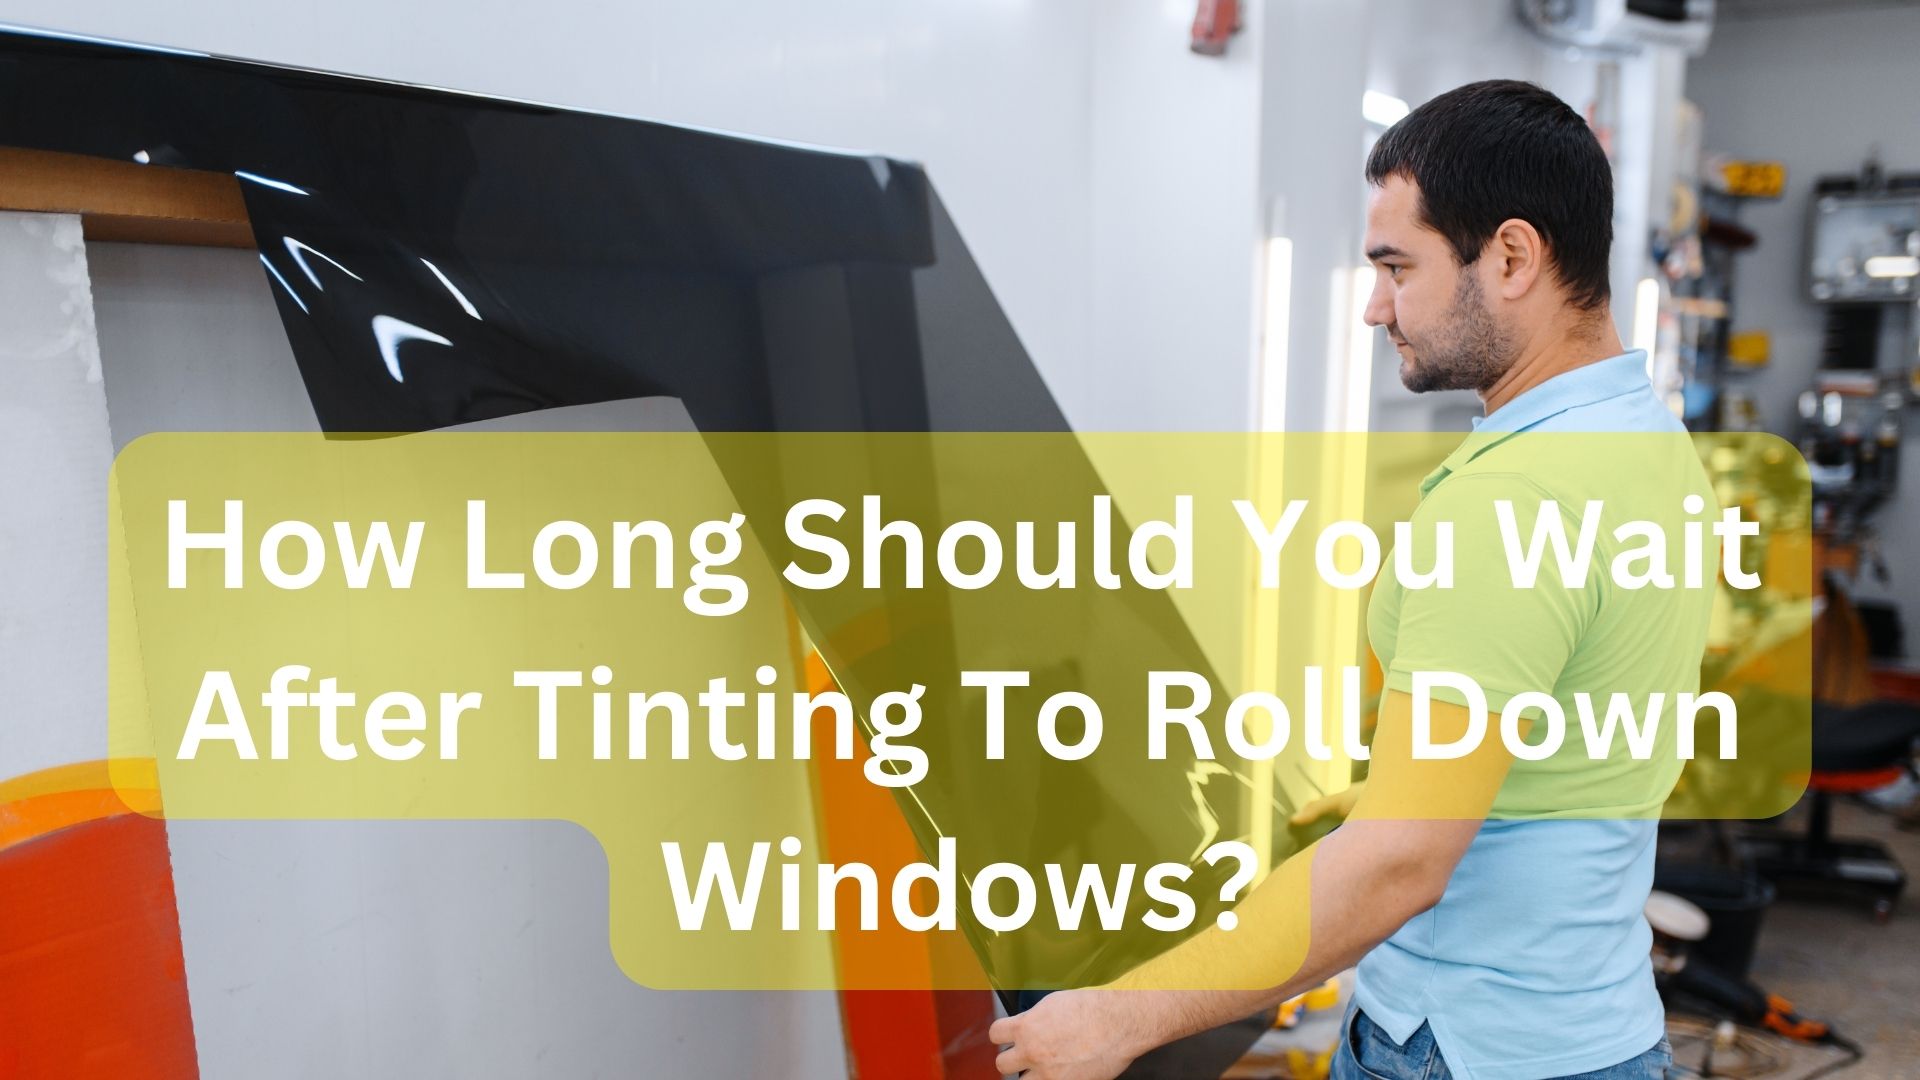 How Long Should You Wait After Tinting To Roll Down Windows?